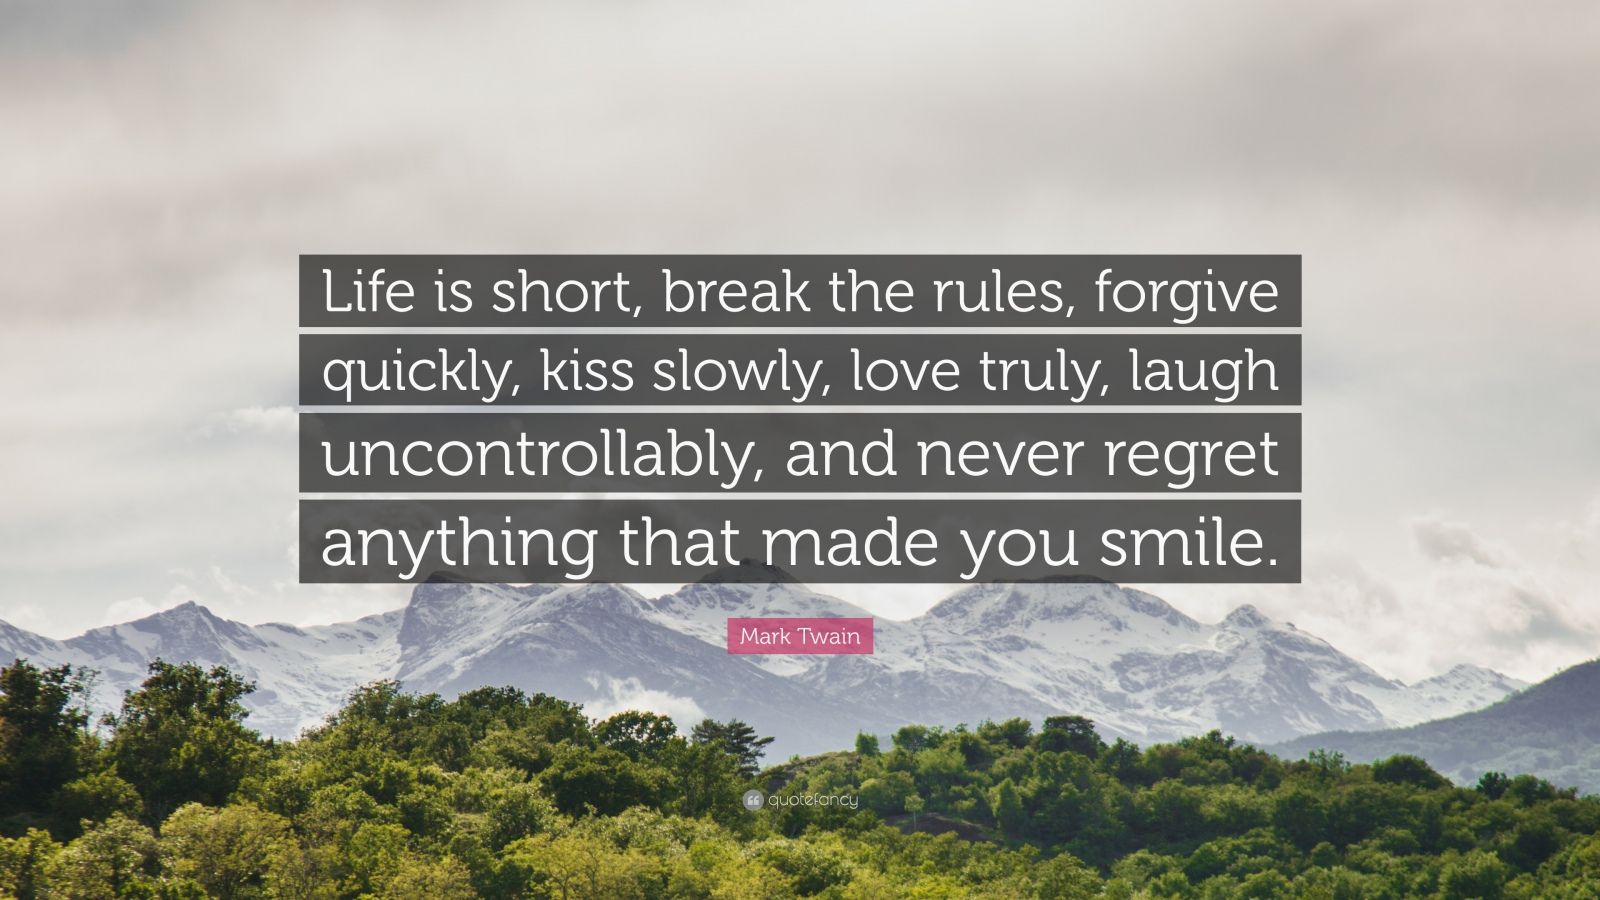 Mark Twain Quote “Life is short break the rules forgive quickly